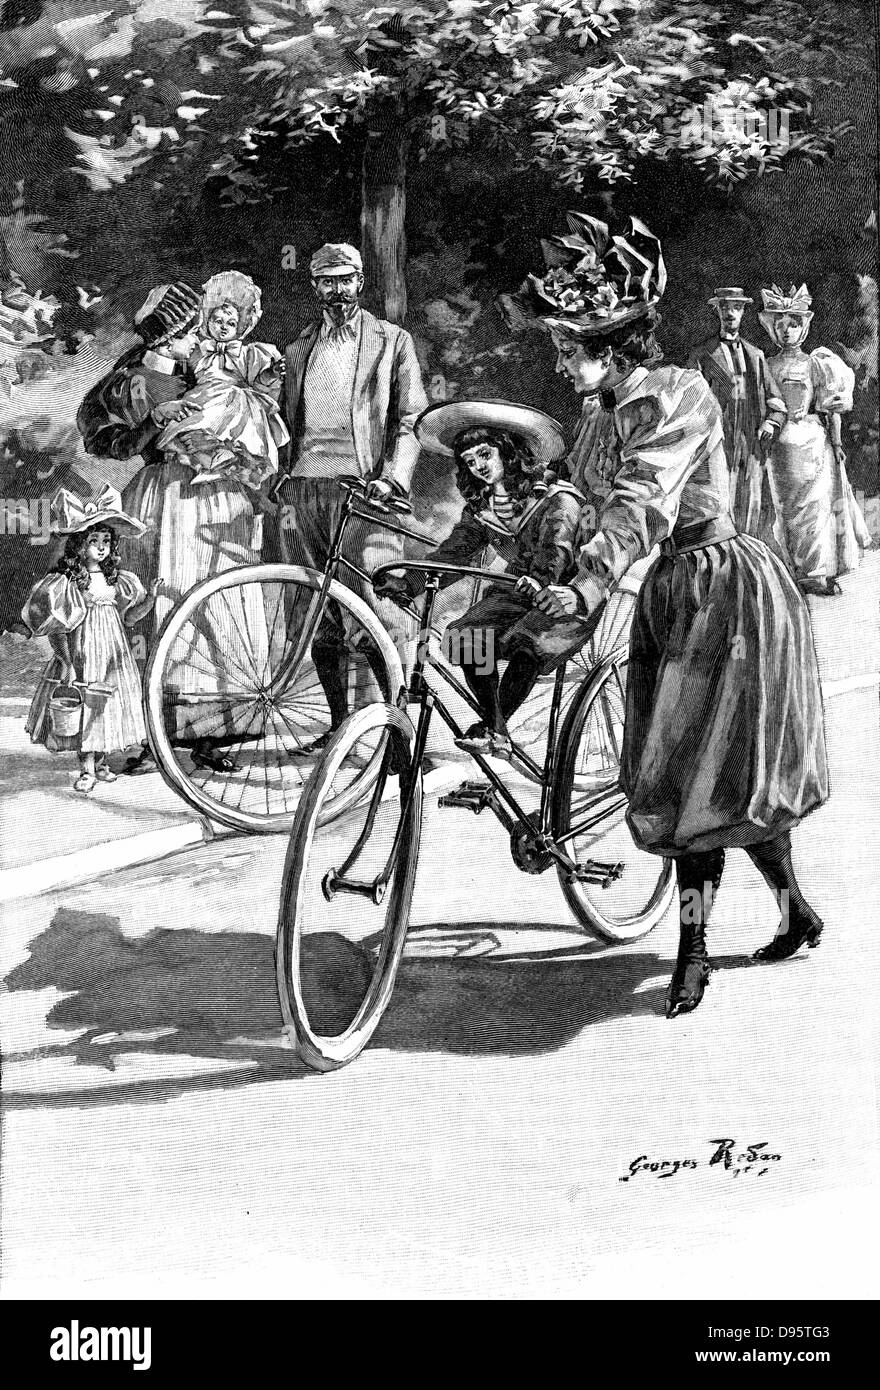 Cycling: Lady in 'Rational' cycling dress of knickerbockers and gaiters, giving small daughter a ride on the saddle. French illustration c1890. Stock Photo